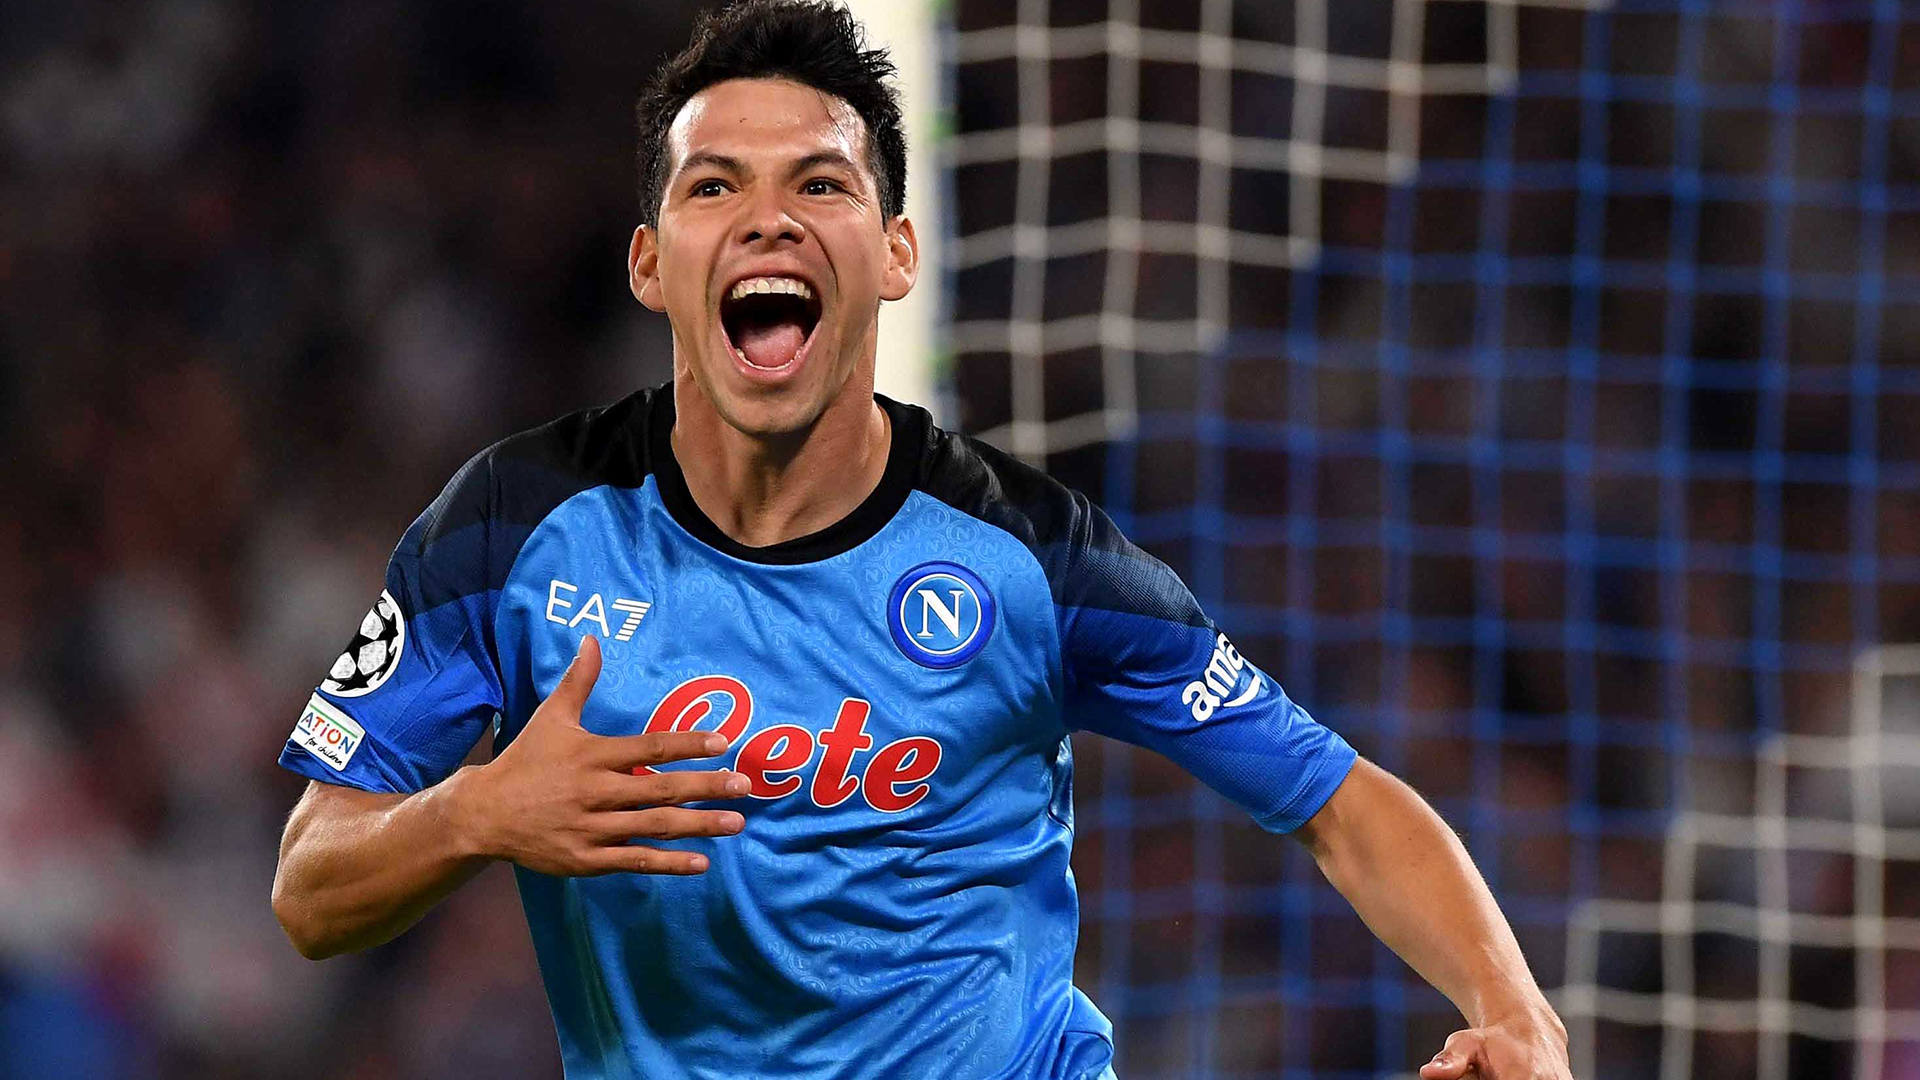 Hirving Lozano of Napoli celebrates after scoring the first goal for Napoli during the UEFA Champions League group A match between SSC Napoli and AFC Ajax at Stadio Diego Armando Maradona on October 12, 2022 in Naples, Italy.